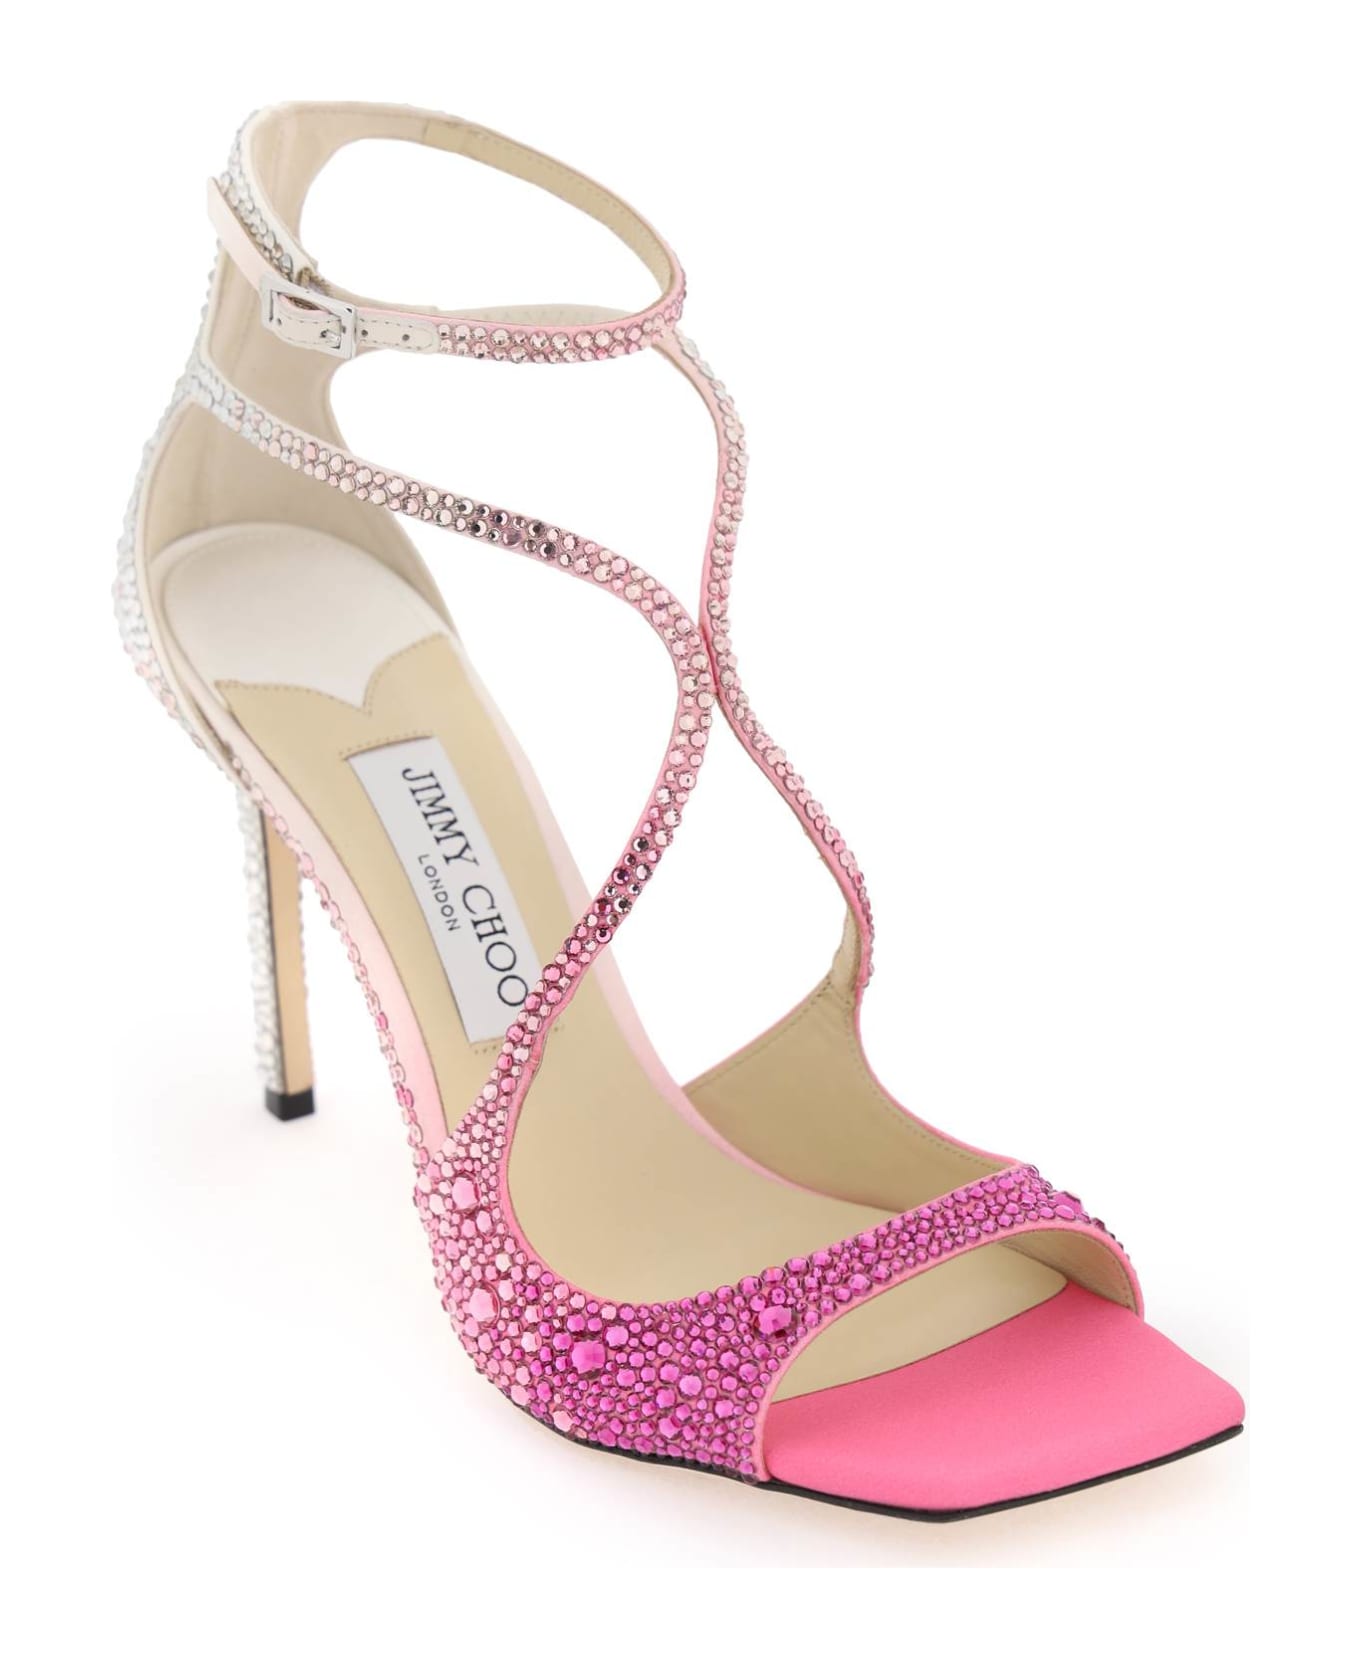 Jimmy Choo Azia 95 Pumps With Crystals - CANDY PINK CRYSTAL (Fuchsia)